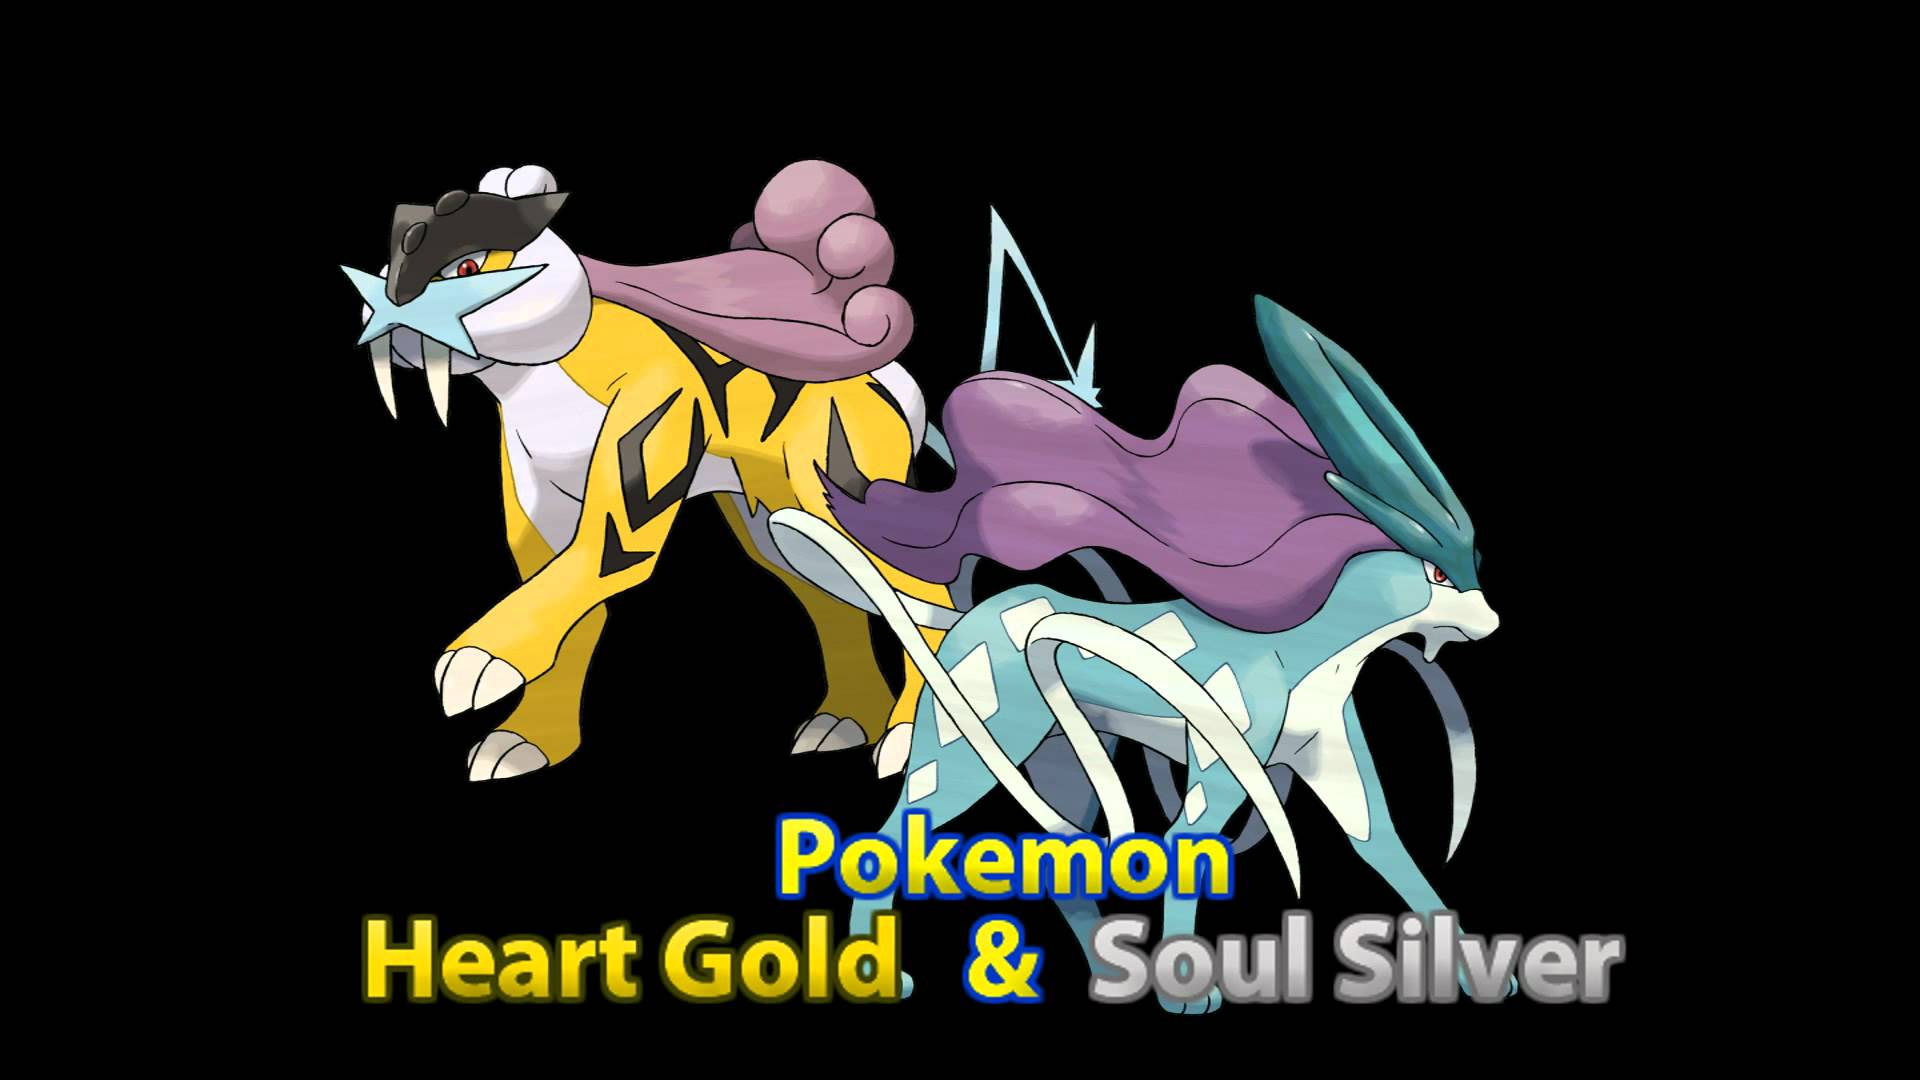 ♪ Pokemon Heart Gold & Soul Silver and Suicune Battle